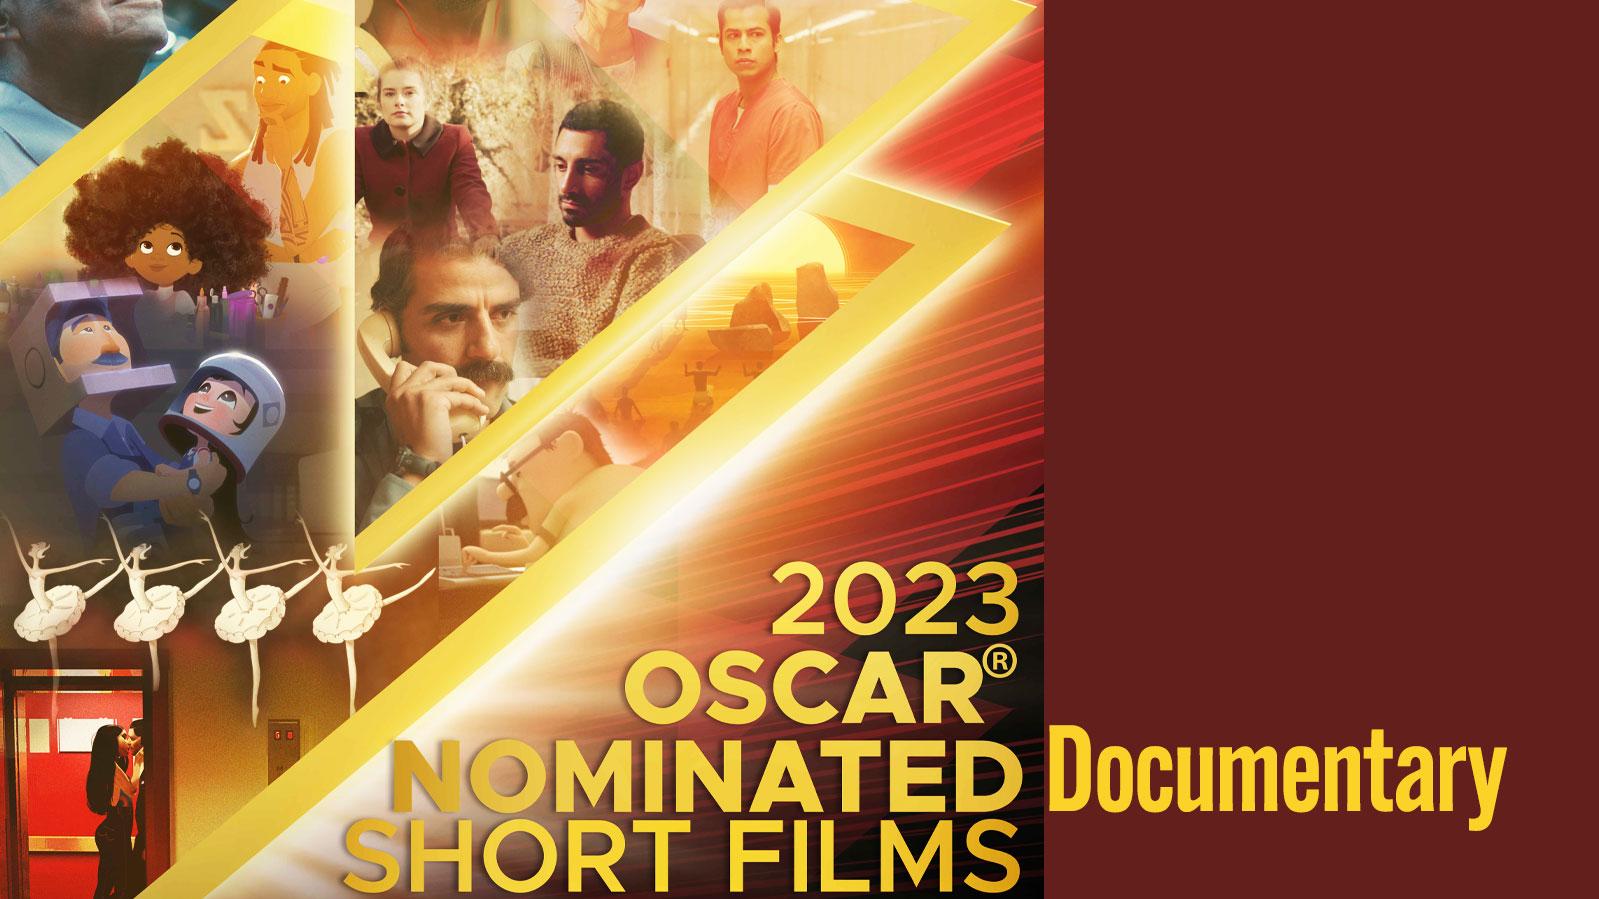 Poster with text "2023 Oscar Nominated Shorts Documentary"